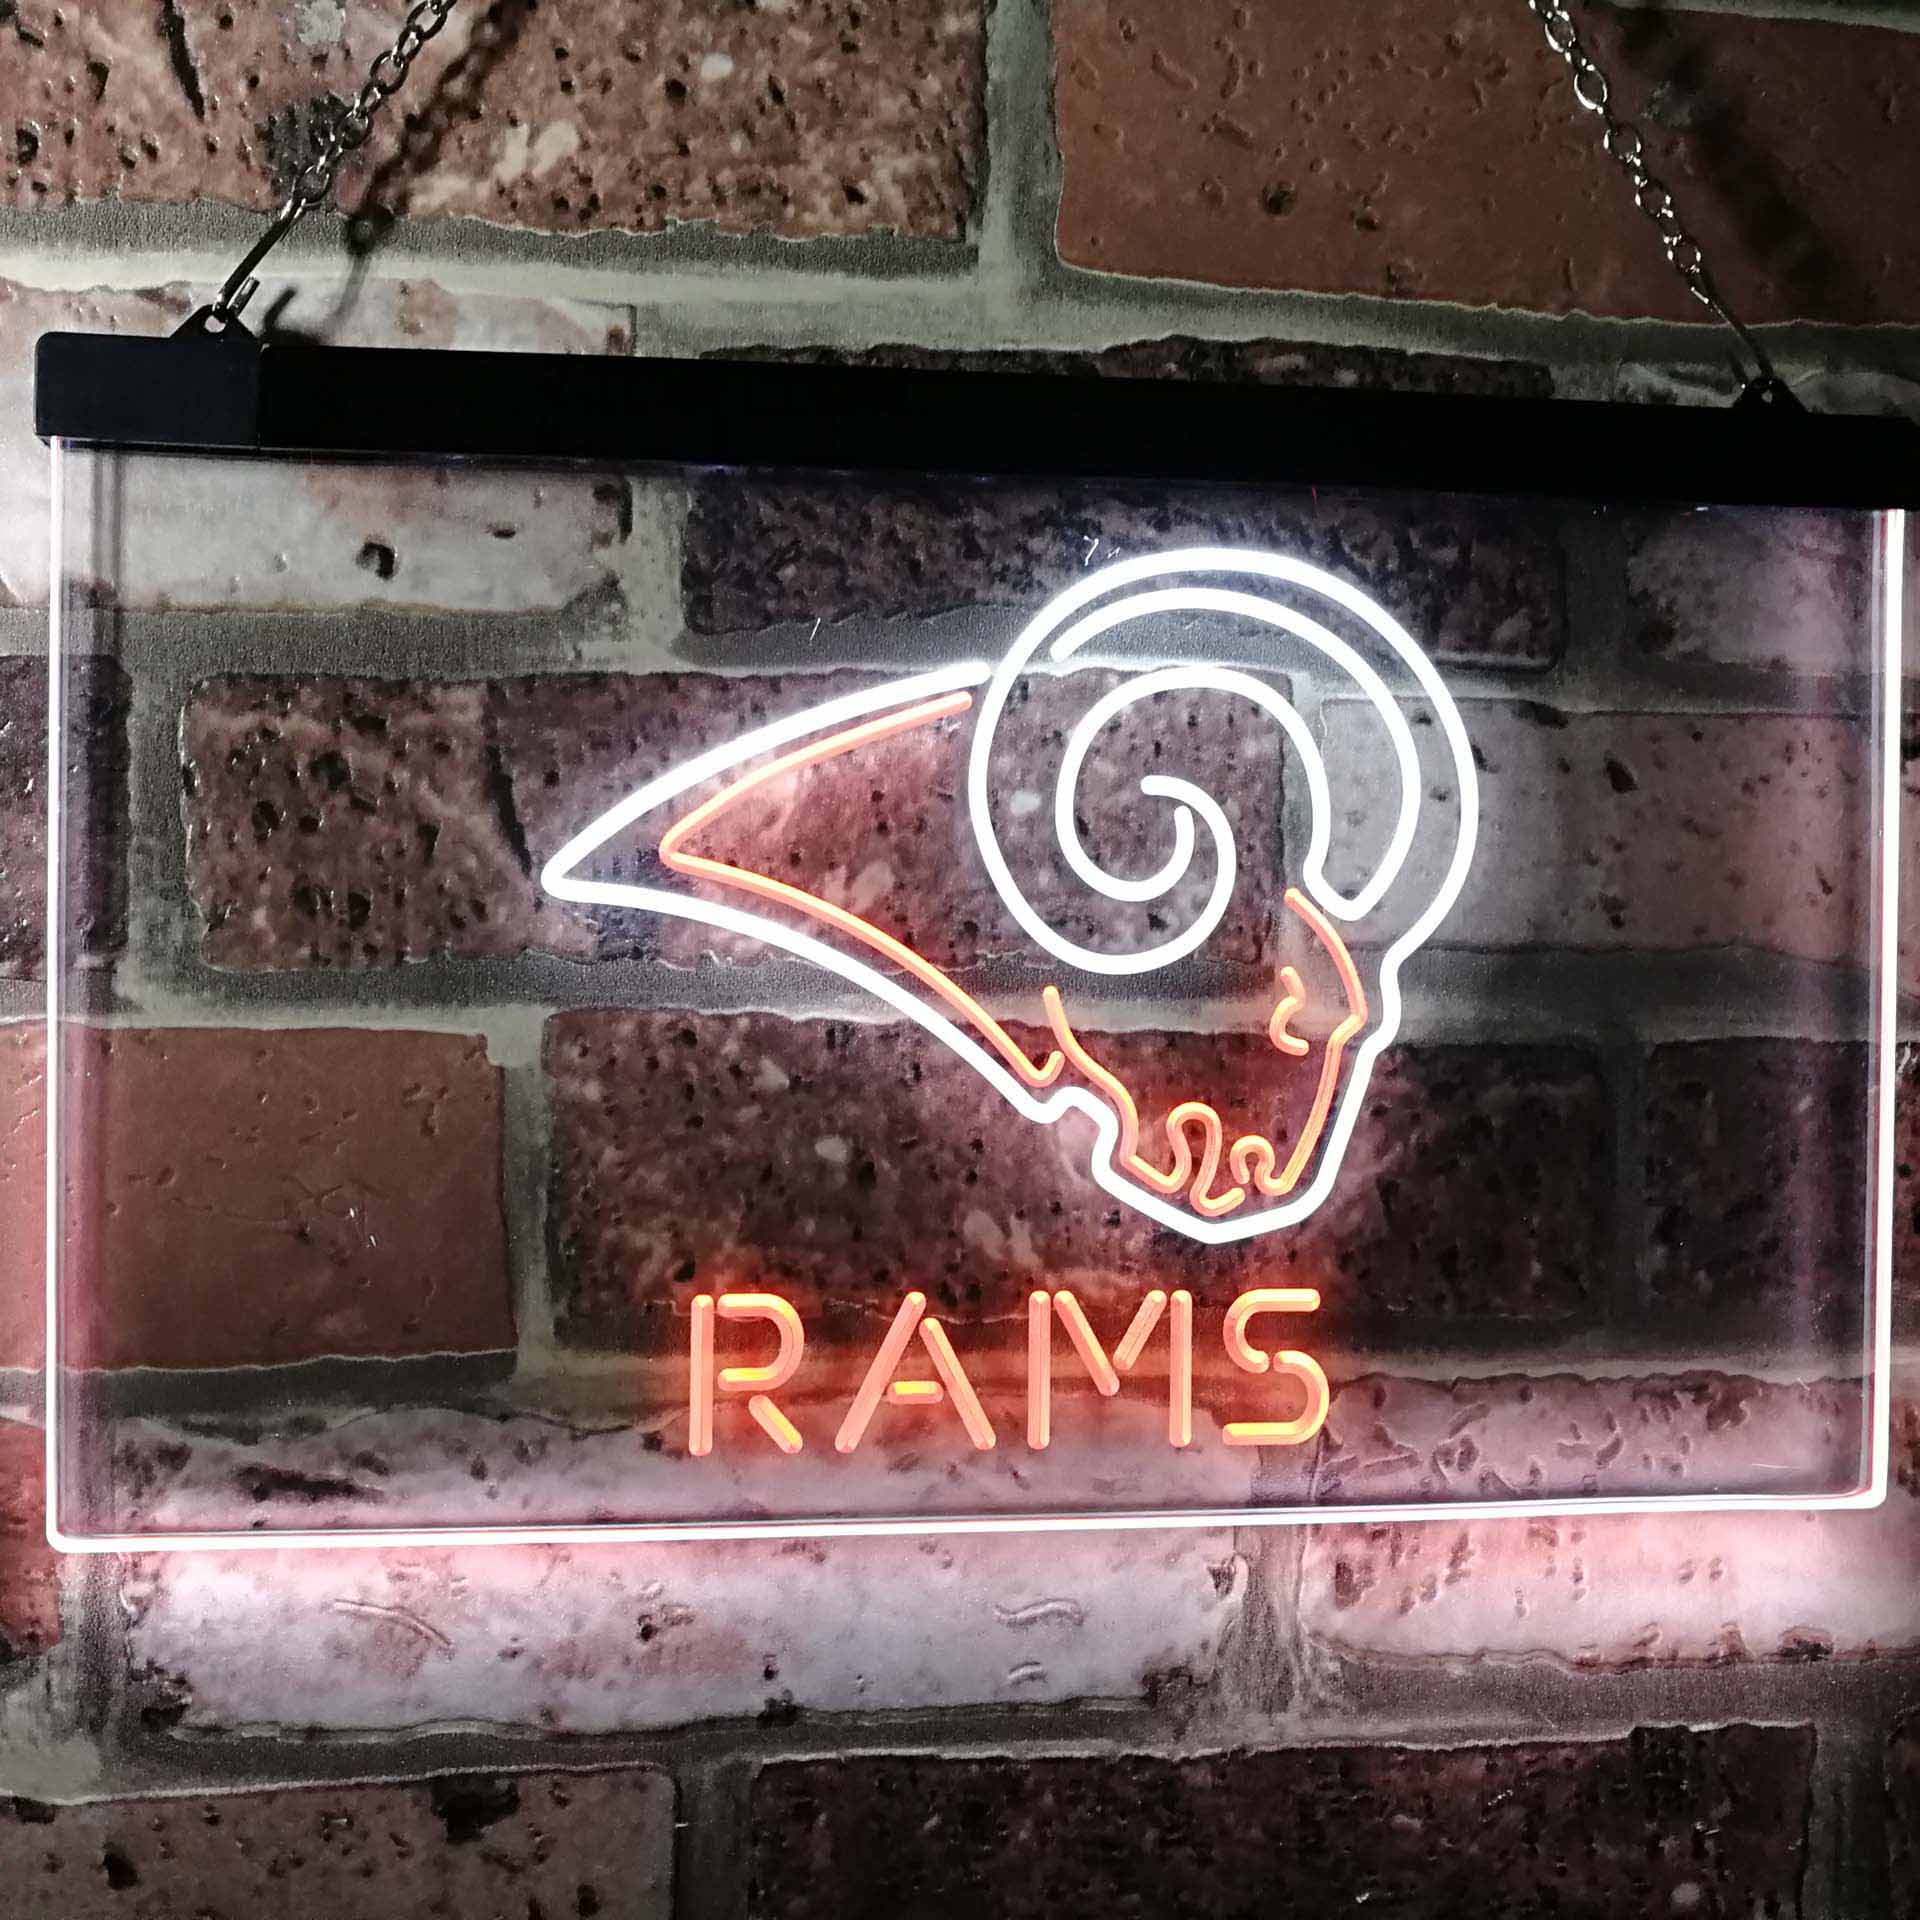 Los Angeles Rams Neon Light LED Sign